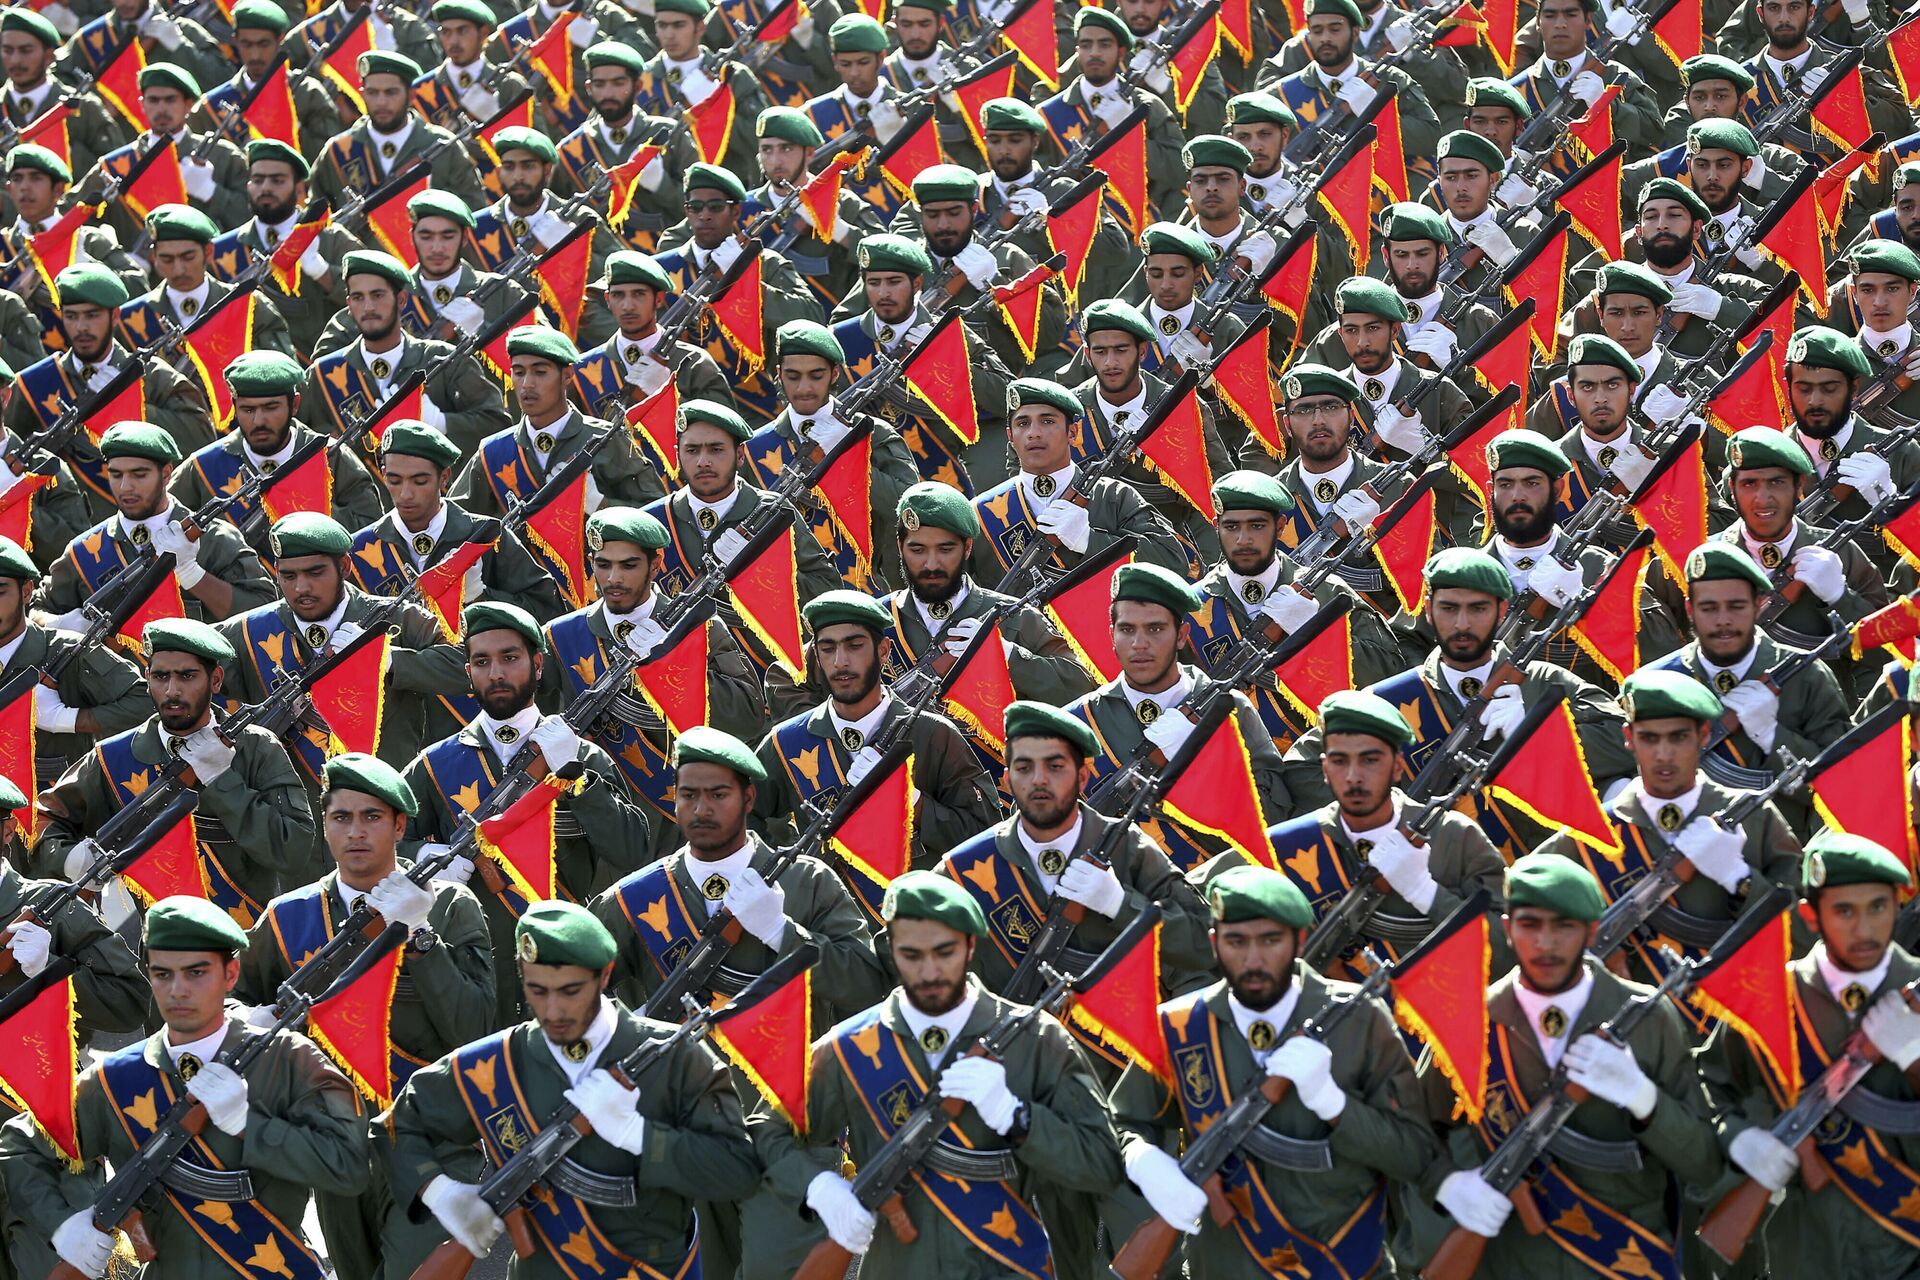 In this Sept. 21, 2016 file photo, Iran's Revolutionary Guard troops march in a military parade marking the 36th anniversary of Iraq's 1980 invasion of Iran, in front of the shrine of late revolutionary founder Ayatollah Khomeini, just outside Tehran, Iran.  - Sputnik International, 1920, 27.03.2022